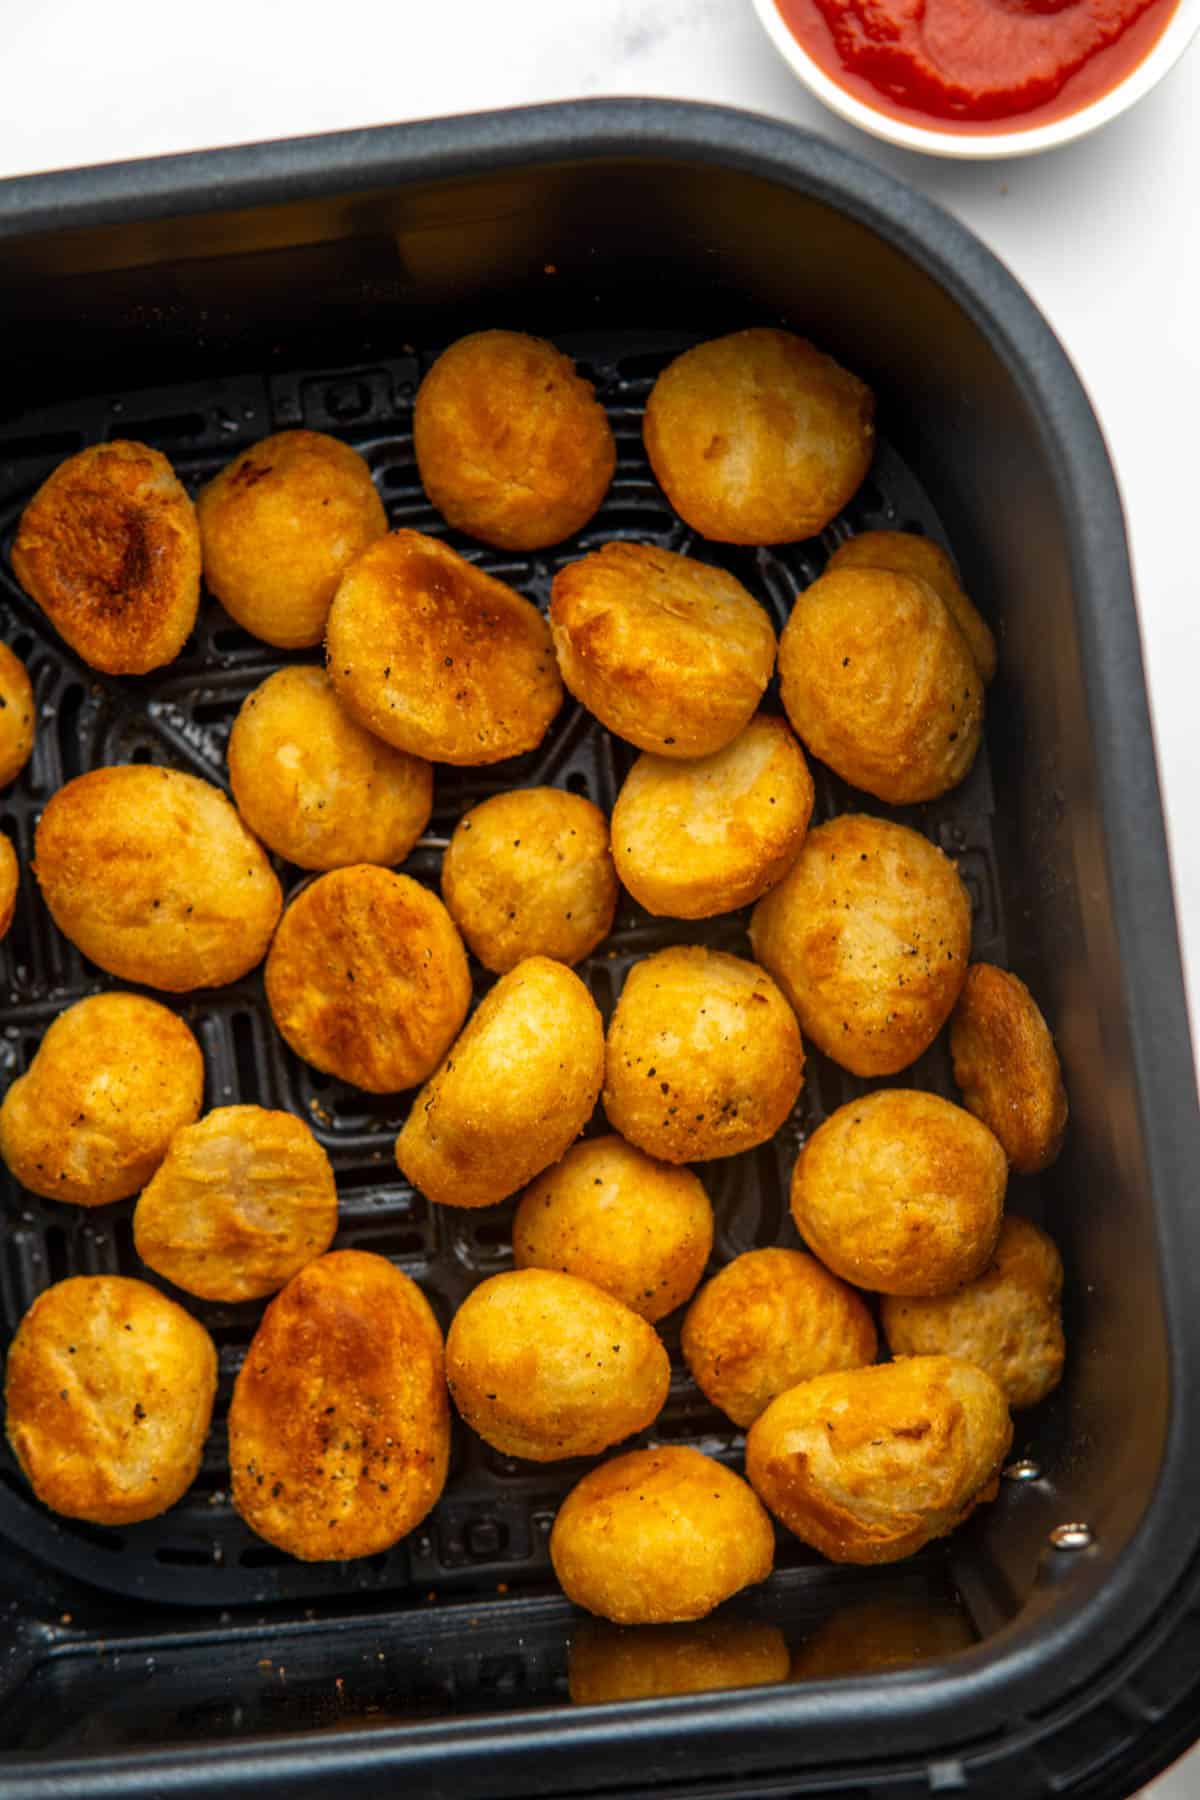 Crispy, golden roast potatoes in the air fryer basket after being cooked.